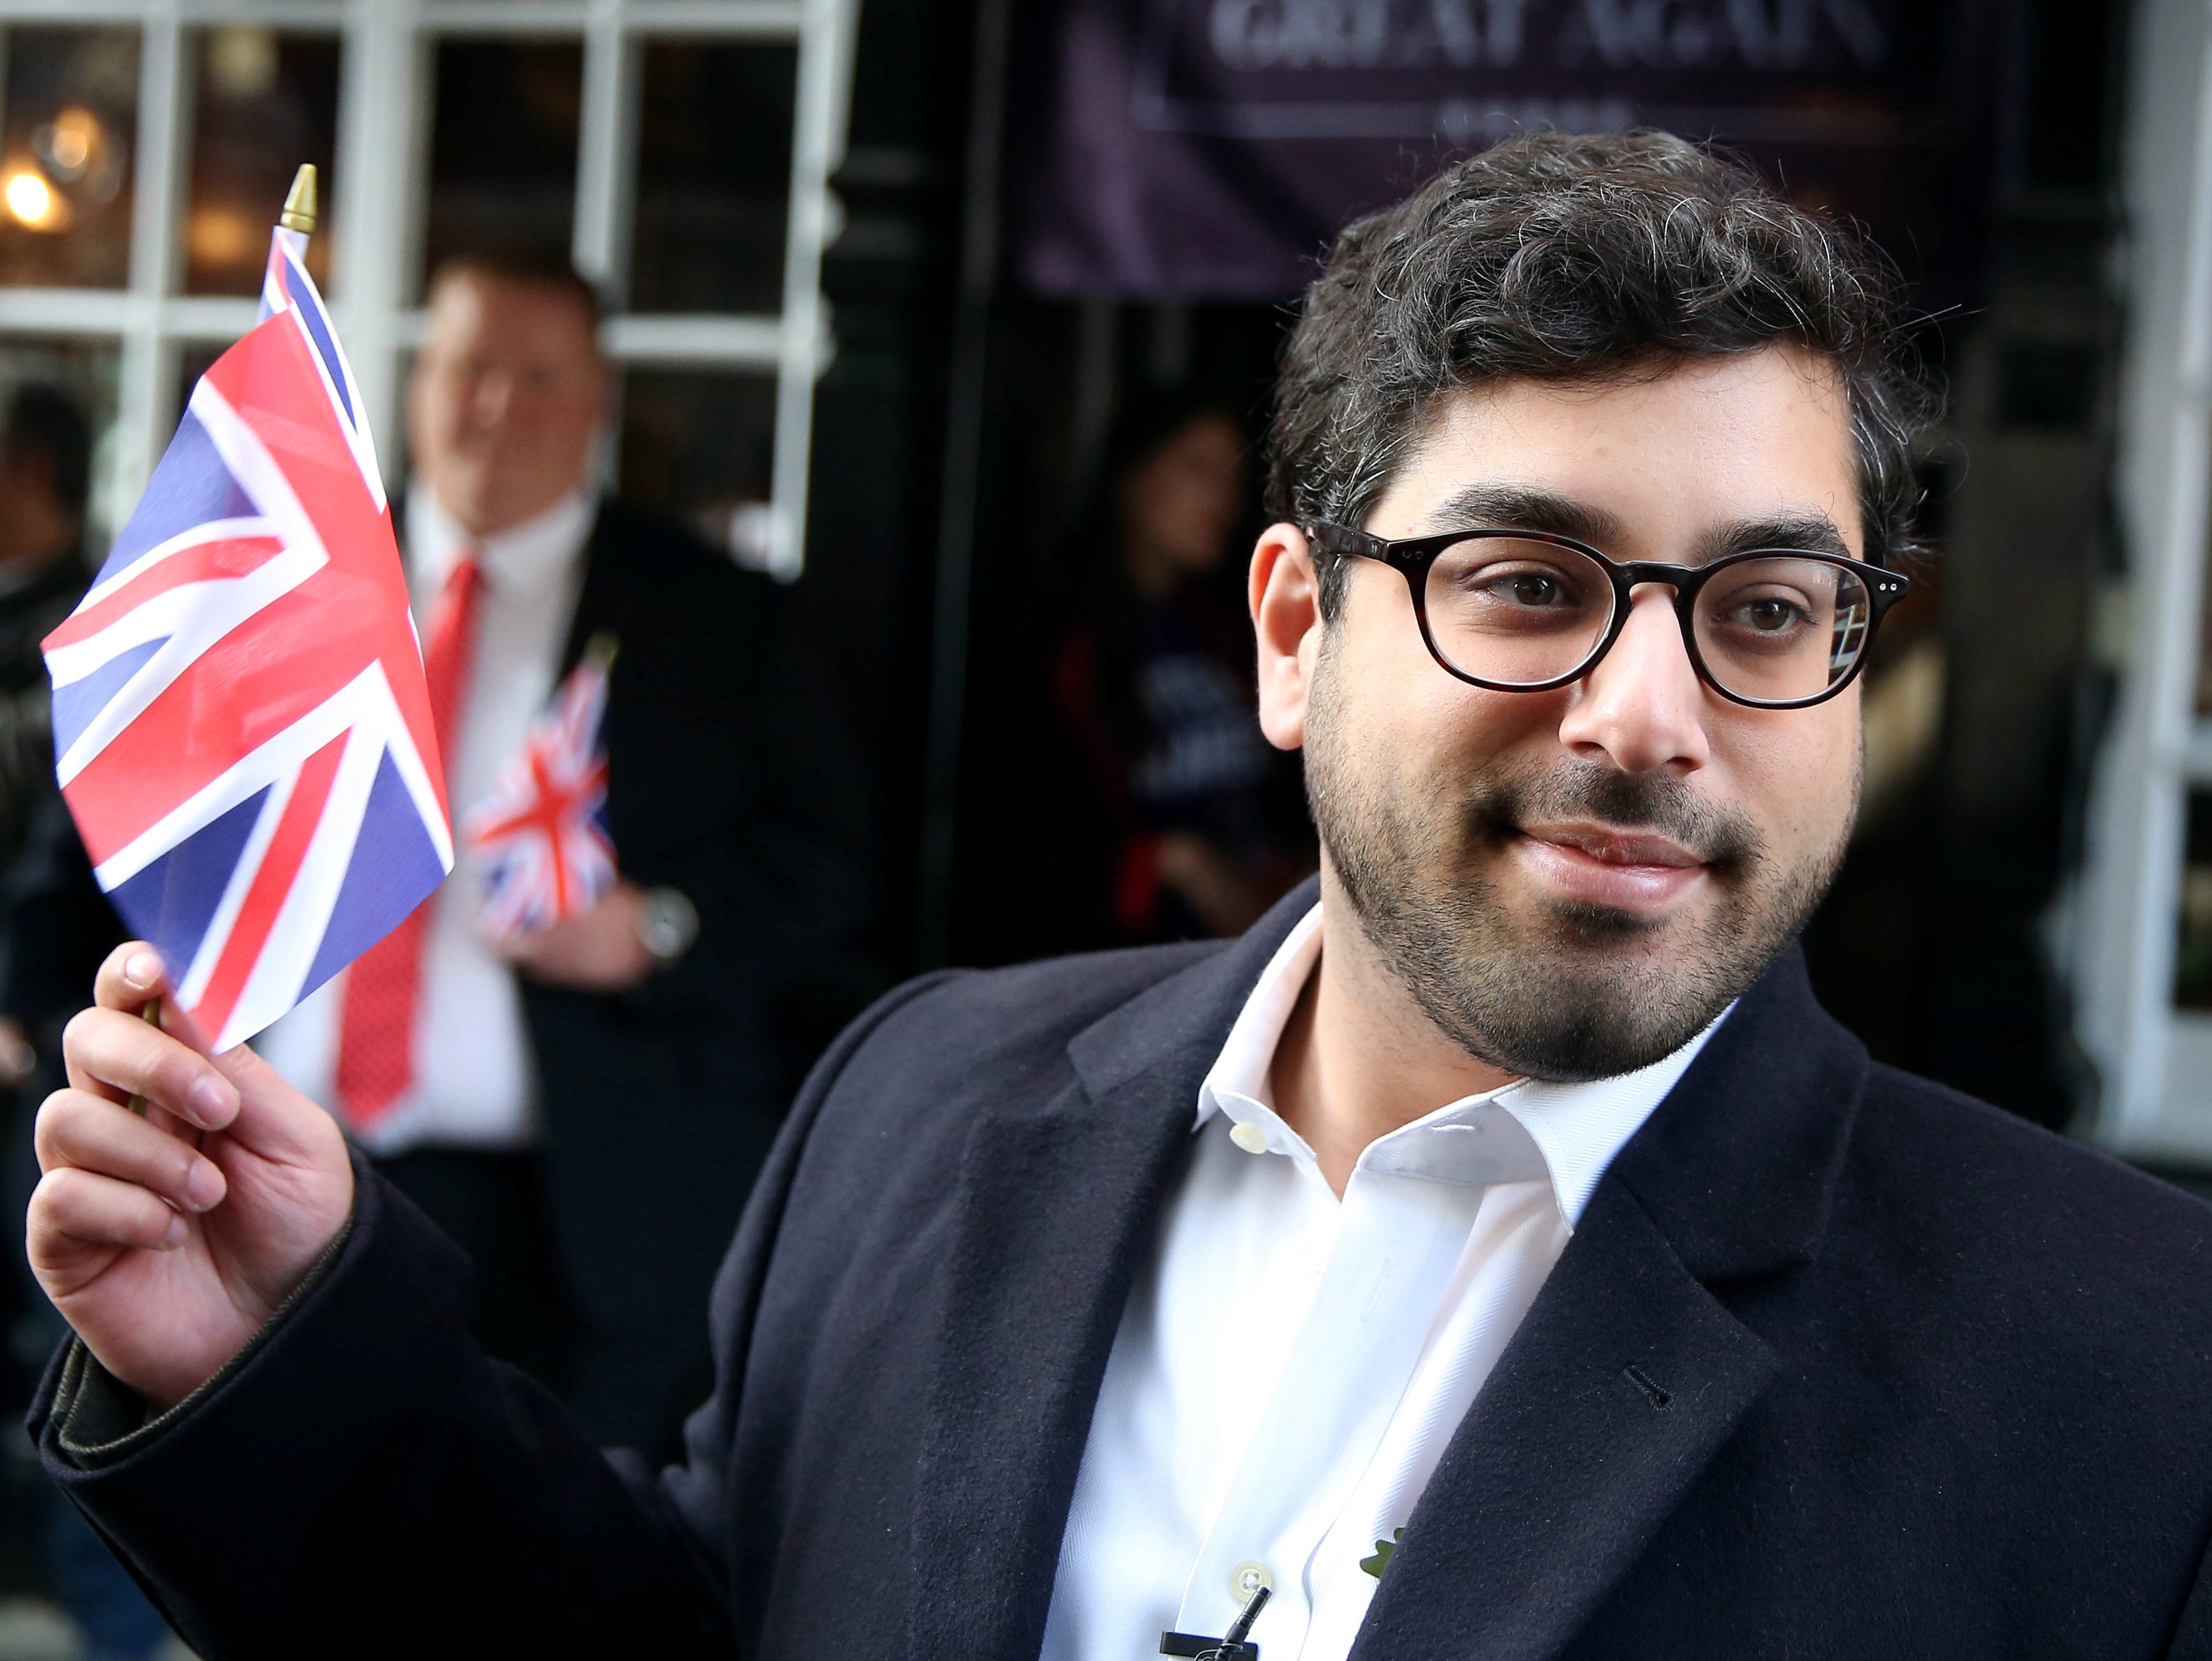 Breitbart editor says 'harassment' by Times journalists behind his UKIP leadership race dropout